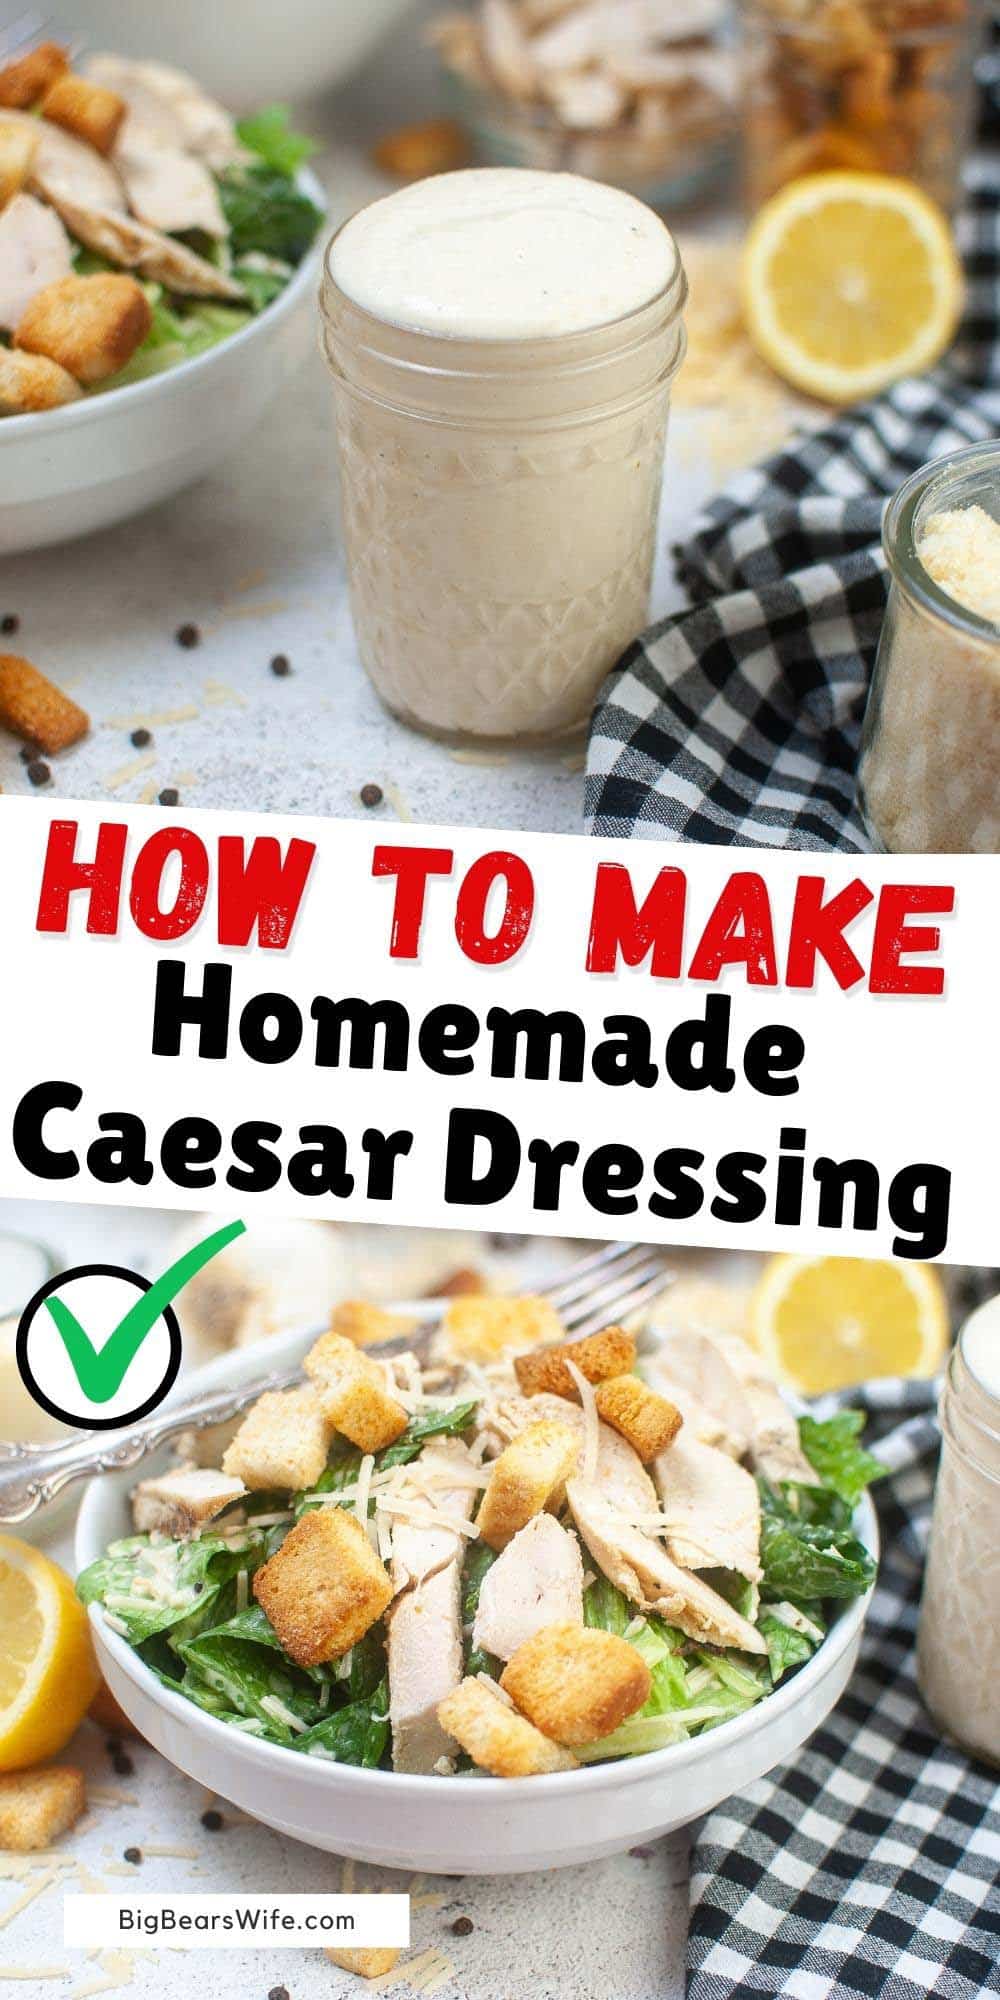 A creamy and wonderful Homemade Caesar Dressing that is perfect for homemade Caesar salad is so simple to make! Simple ingredients and NO anchovies in this recipe!  via @bigbearswife